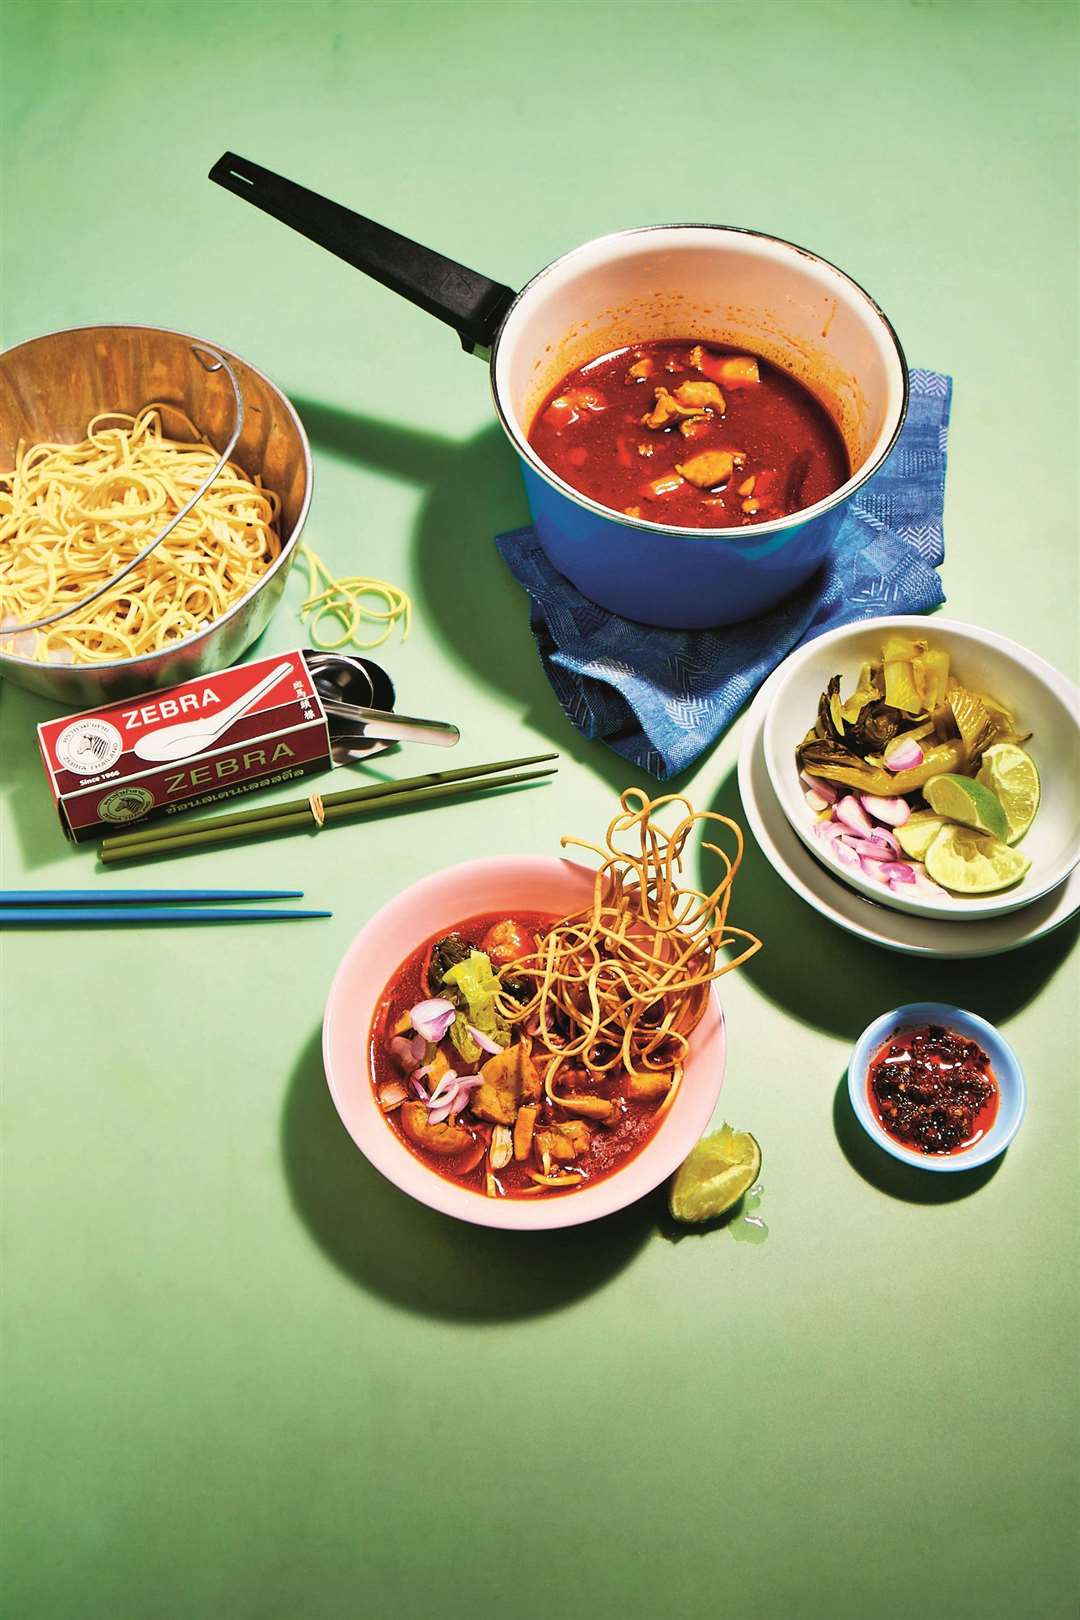 Chiang Mai curried noodles. Photo: Louise Hagger/PA